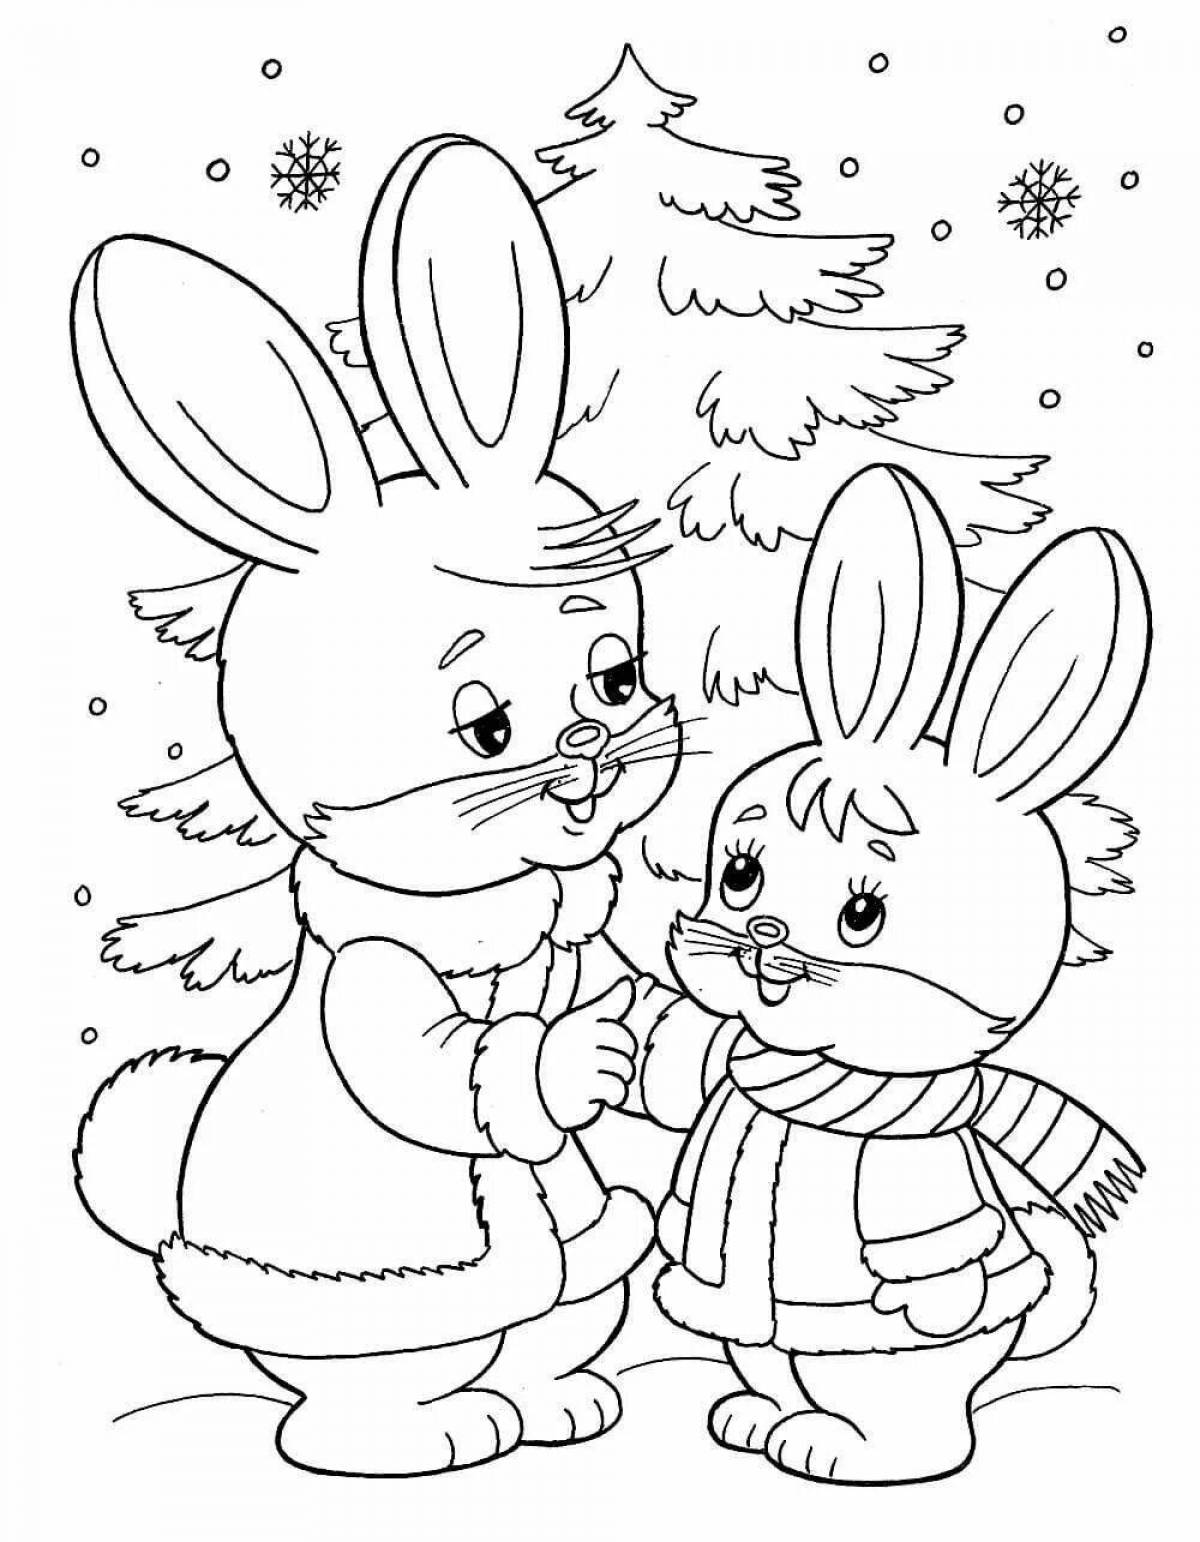 Brilliant coloring page 3 4 years winter